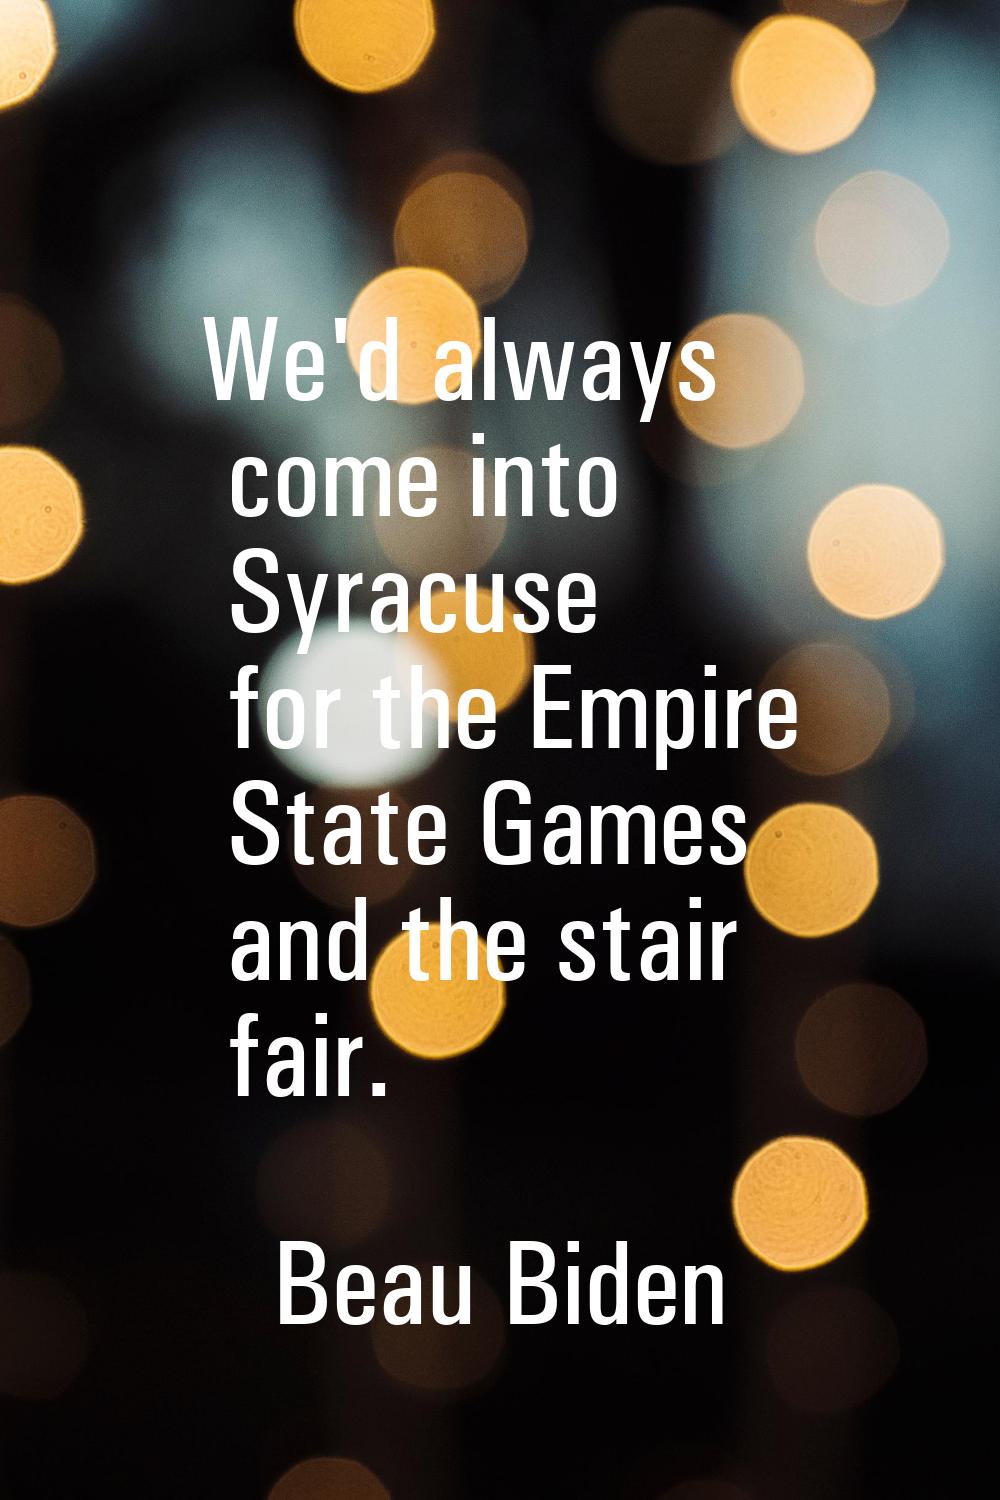 We'd always come into Syracuse for the Empire State Games and the stair fair.